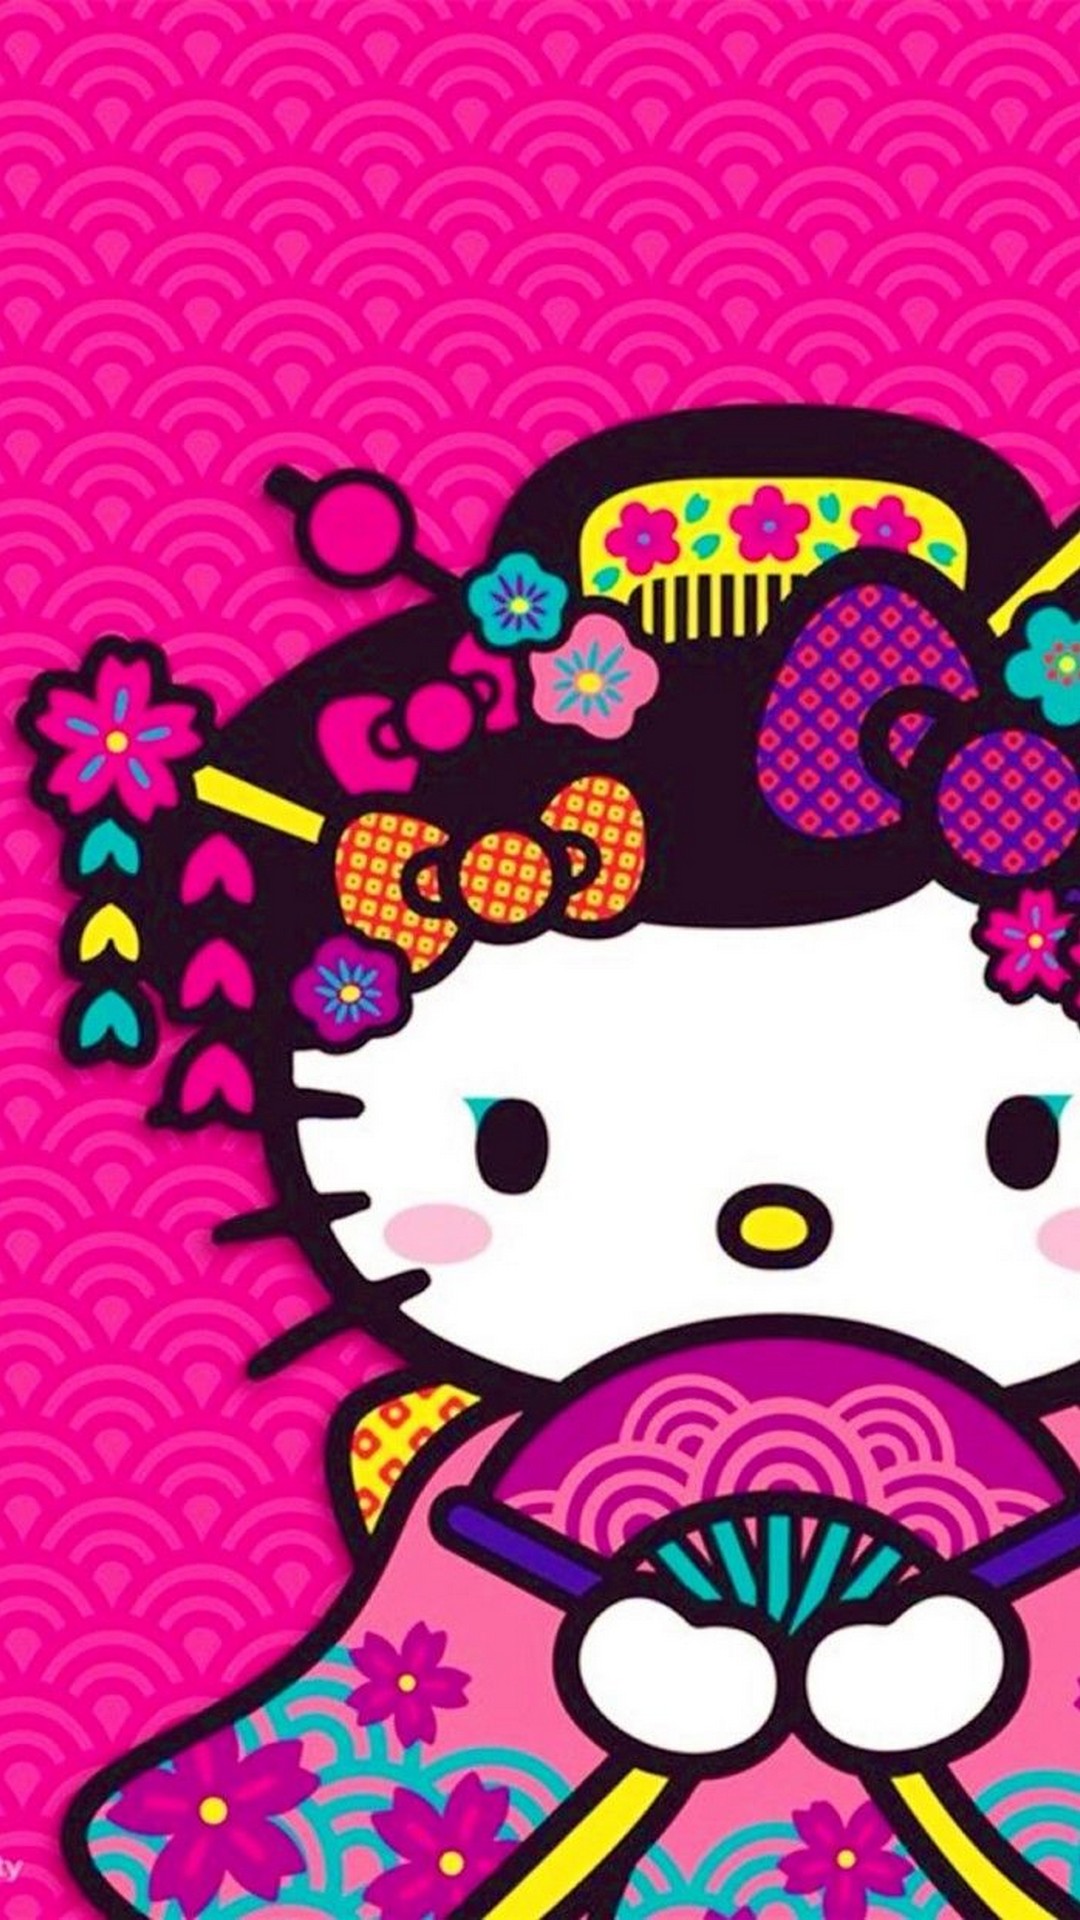 Hello Kitty Android Wallpaper with resolution 1080X1920 pixel. You can make this wallpaper for your Android backgrounds, Tablet, Smartphones Screensavers and Mobile Phone Lock Screen